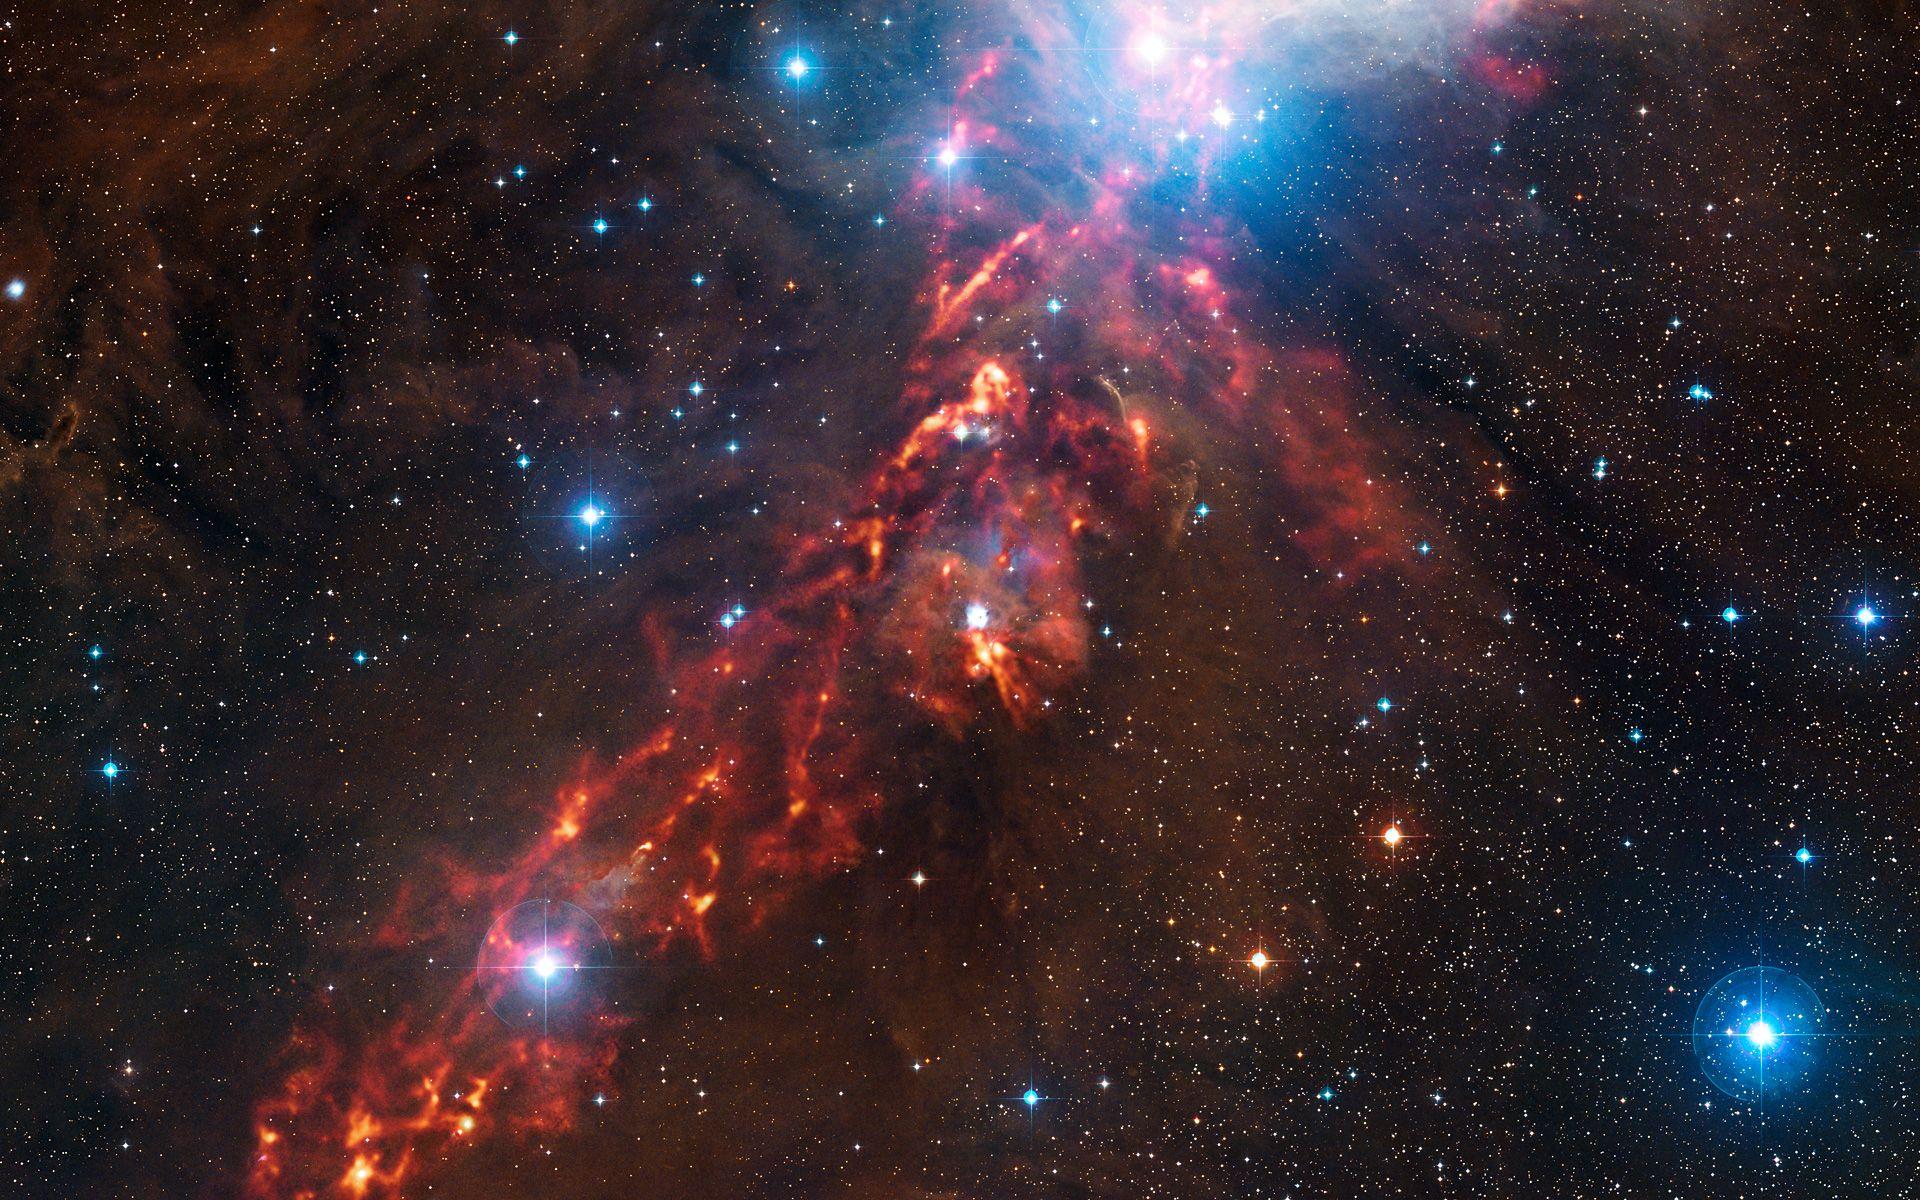 An APEX view of star formation in the Orion Nebula wallpaper